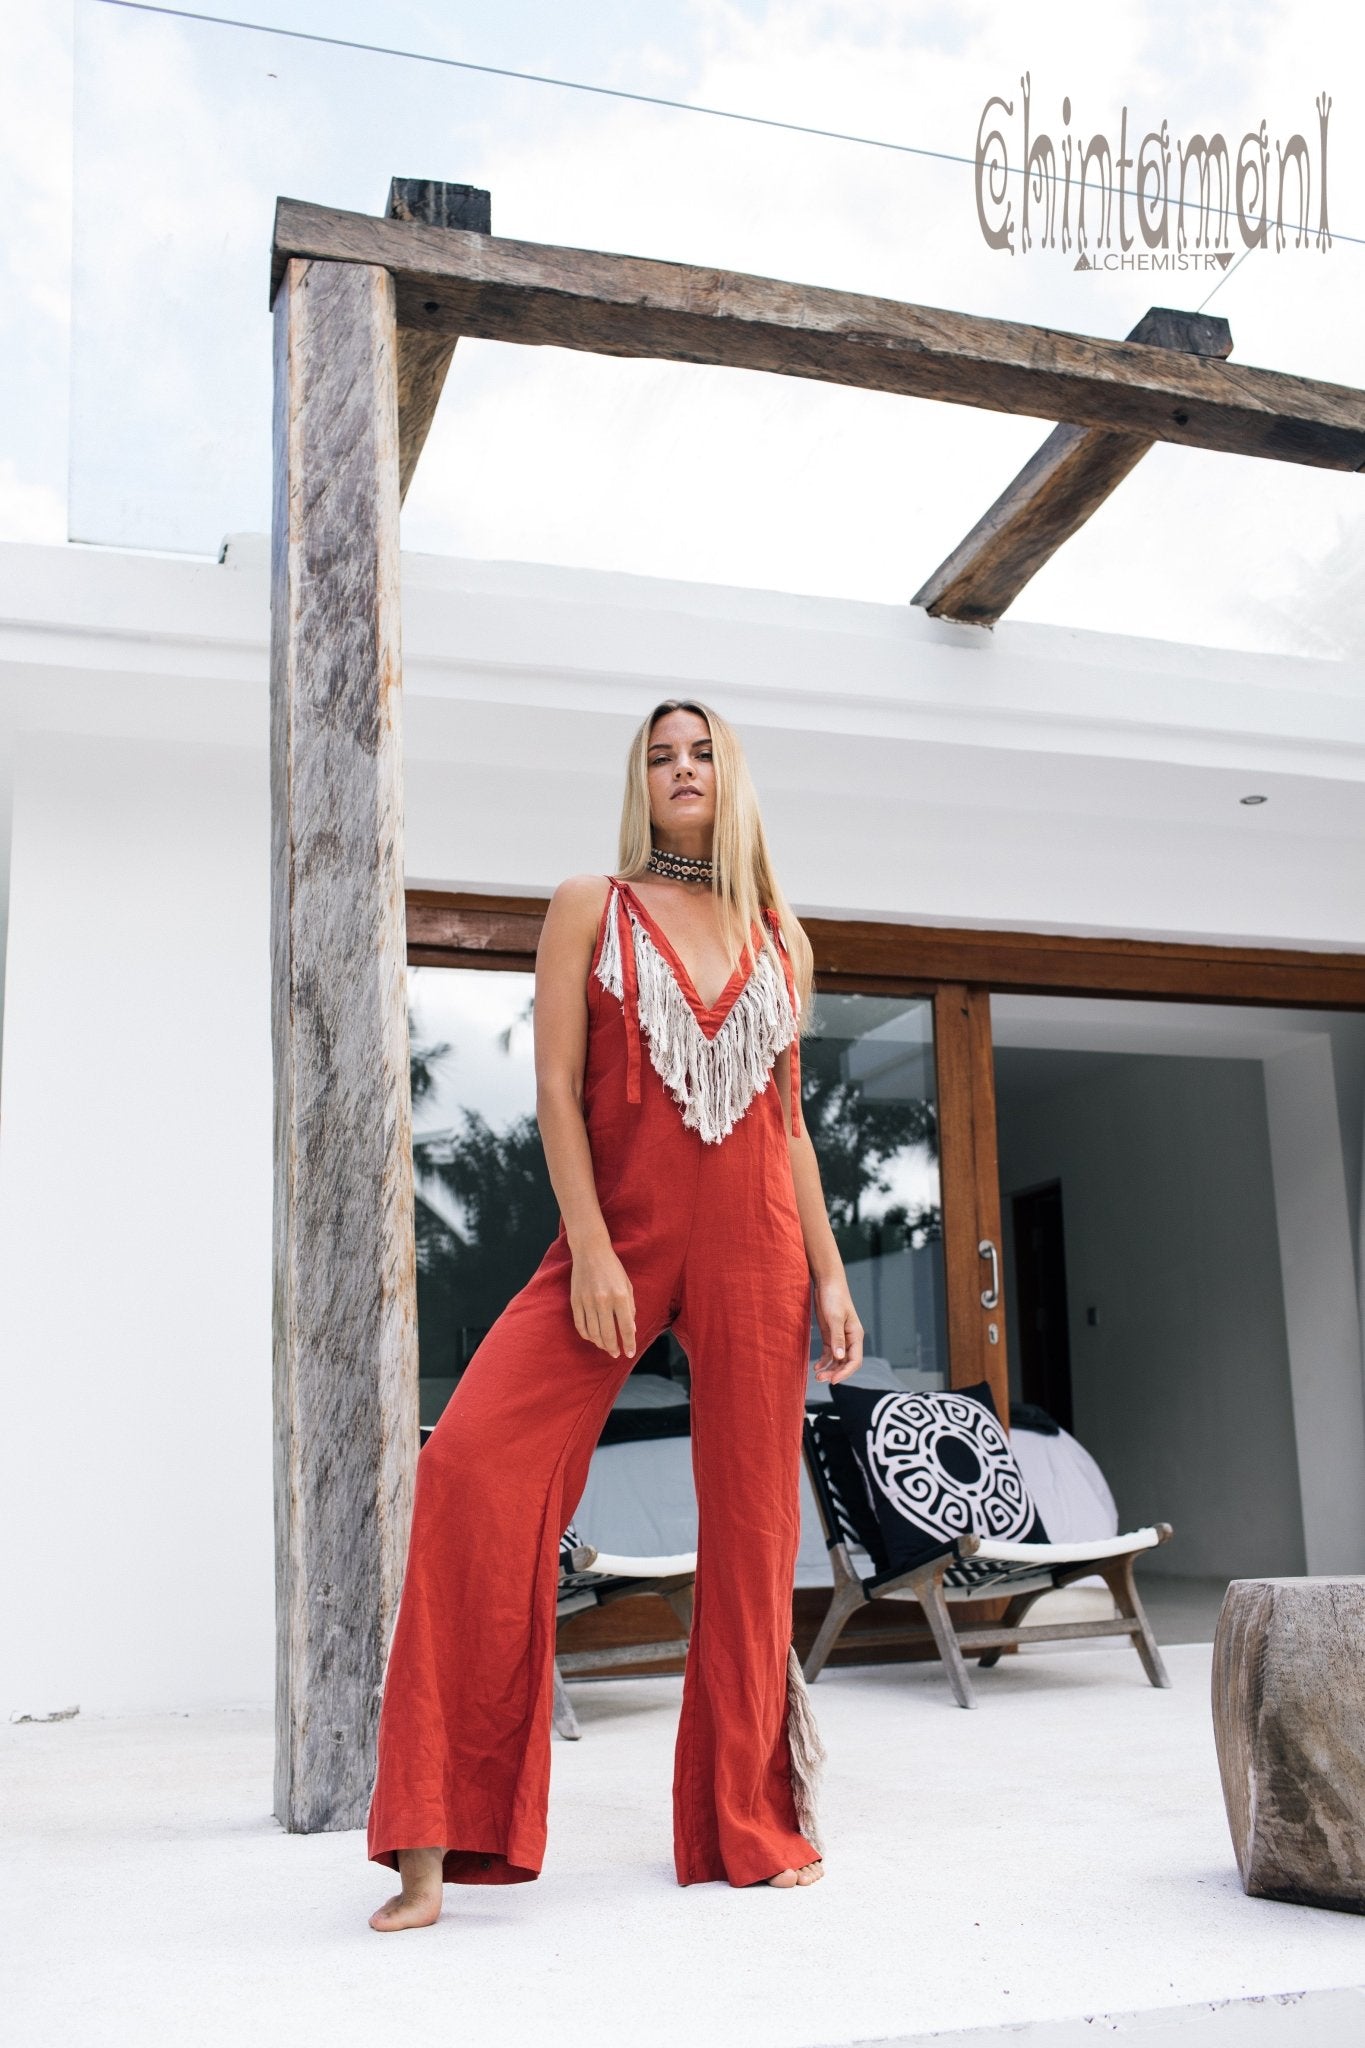 red jumpsuit outfit